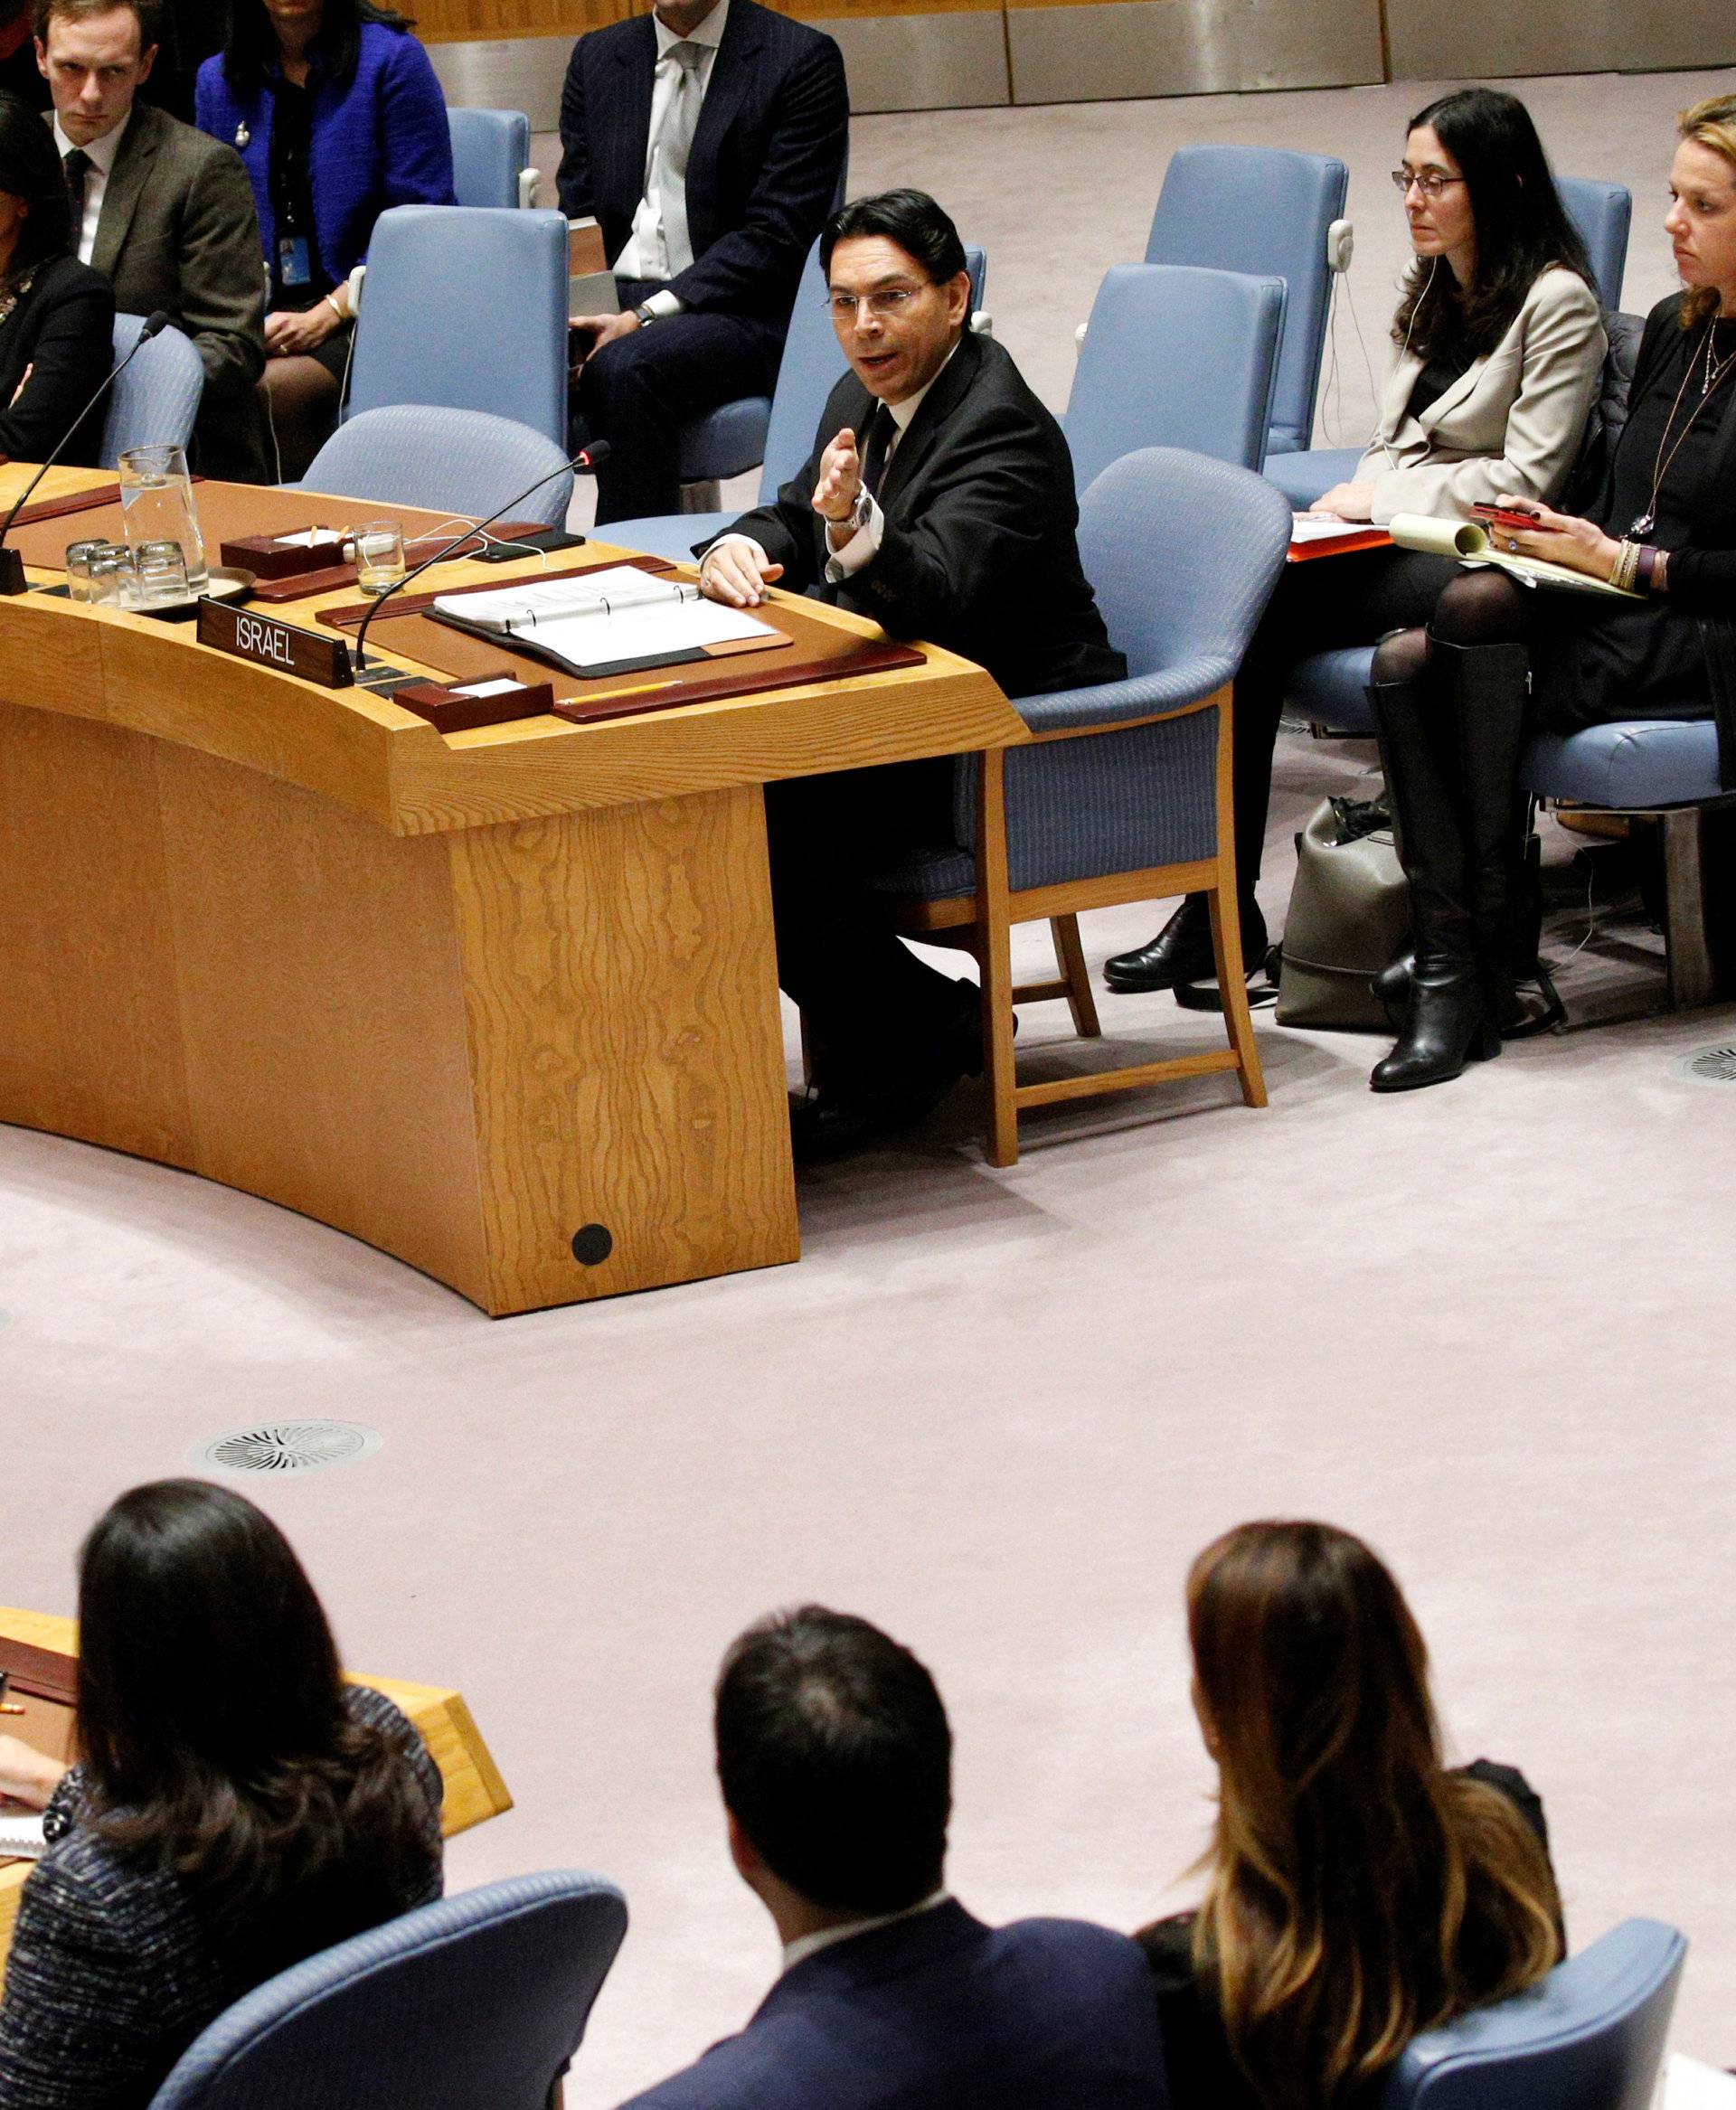 Israel's Ambassador to the United Nations Danny Danon speaks during the United Nations Security Council meeting on the situation in the Middle East, including Palestine, at U.N. Headquarters in New York